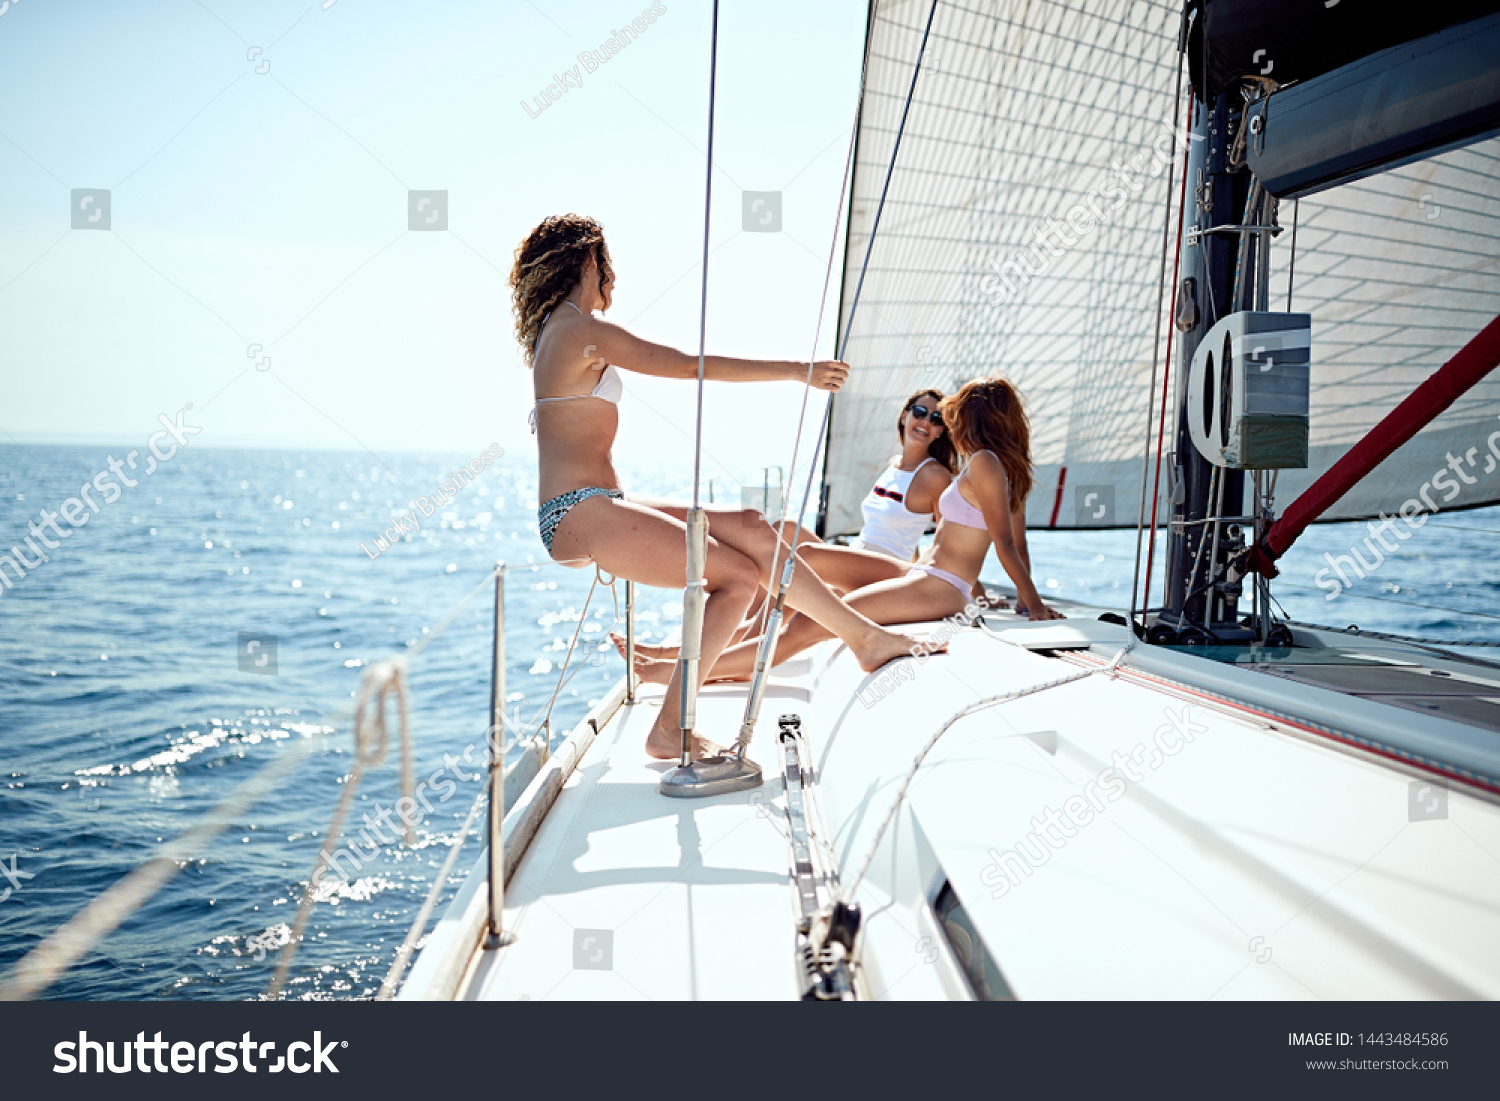 Young cheerful people having fun in boat at summer day
 #1443484586